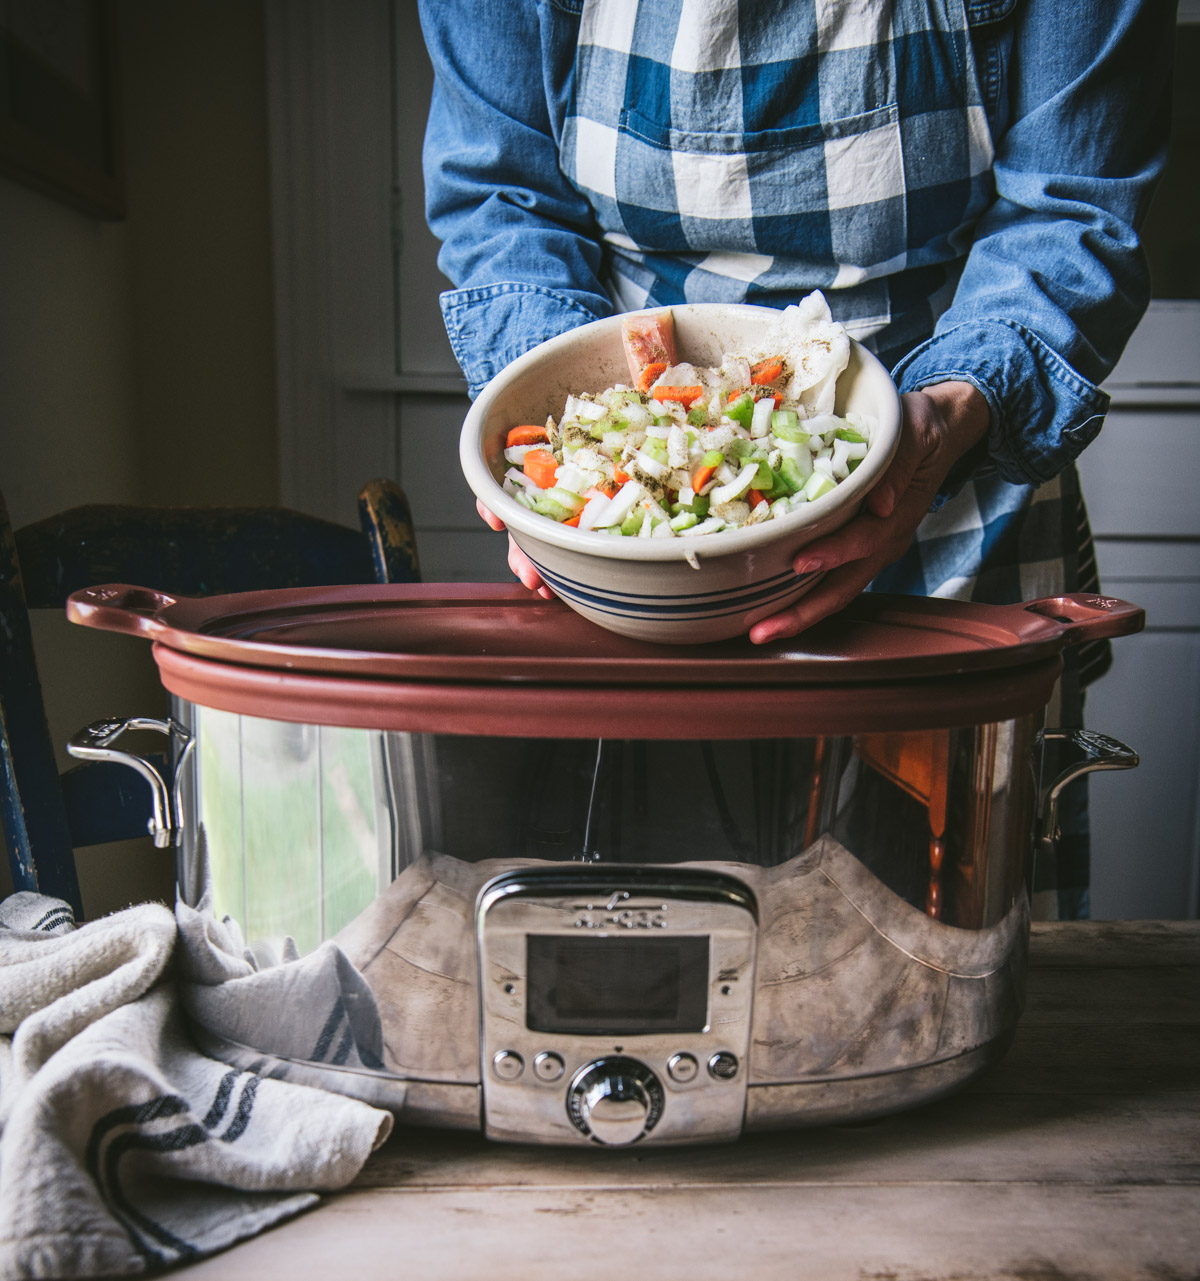 A woman cumps a large bowl of chopped vegetables - onions, carrots, and celery - into a large crockpot.